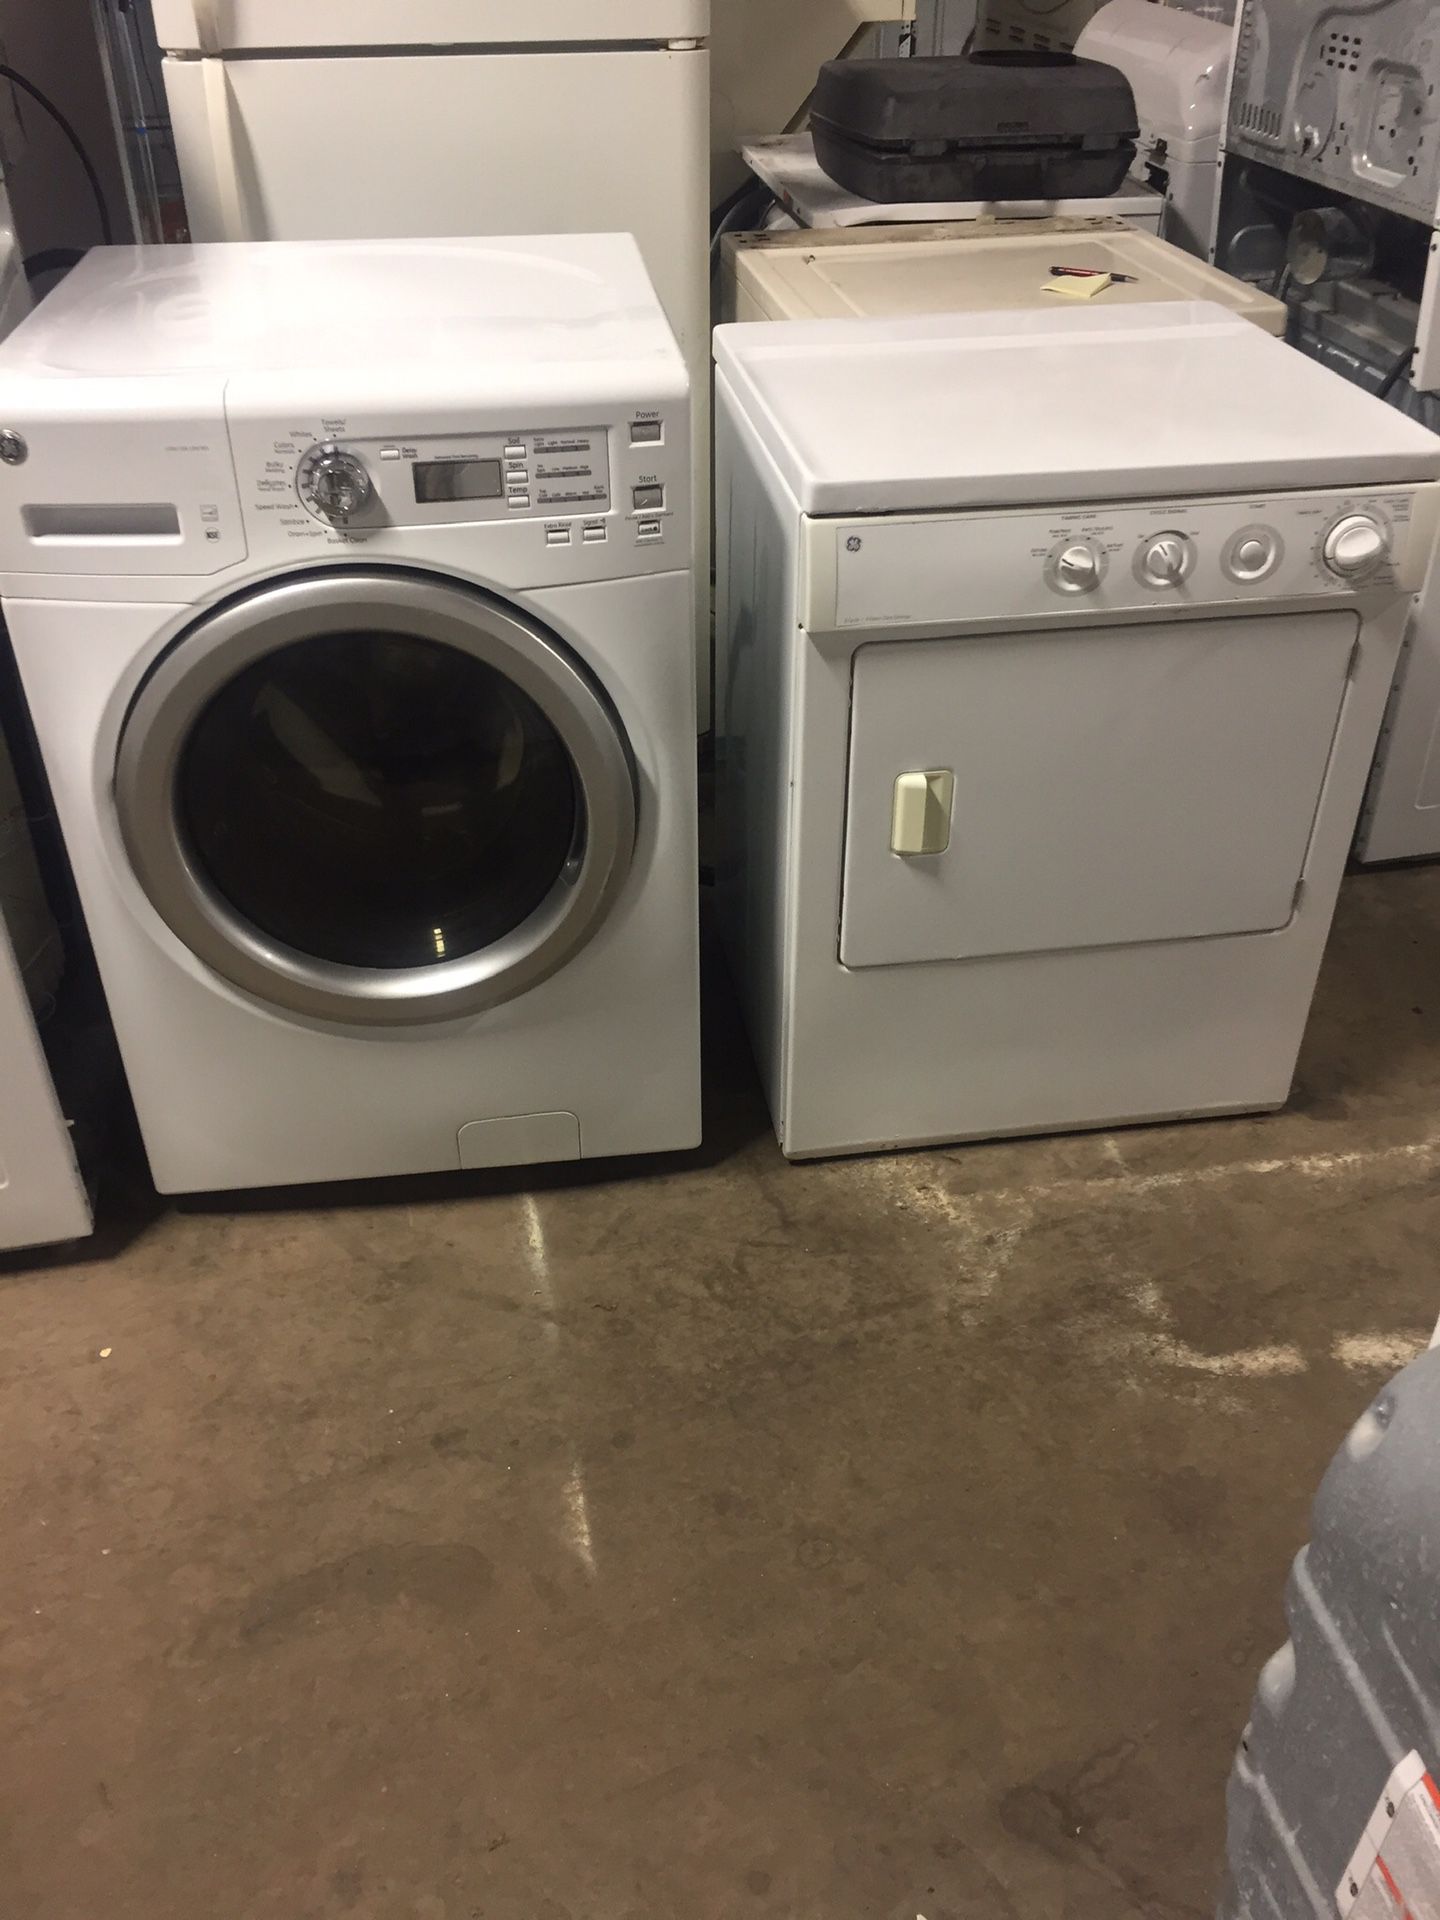 USED GE FRONT LOAD WASHER AND DRYER SET COMES WITH 60 DAY WARRANTY SAME DAY DELIVERY AVAILABLE $425